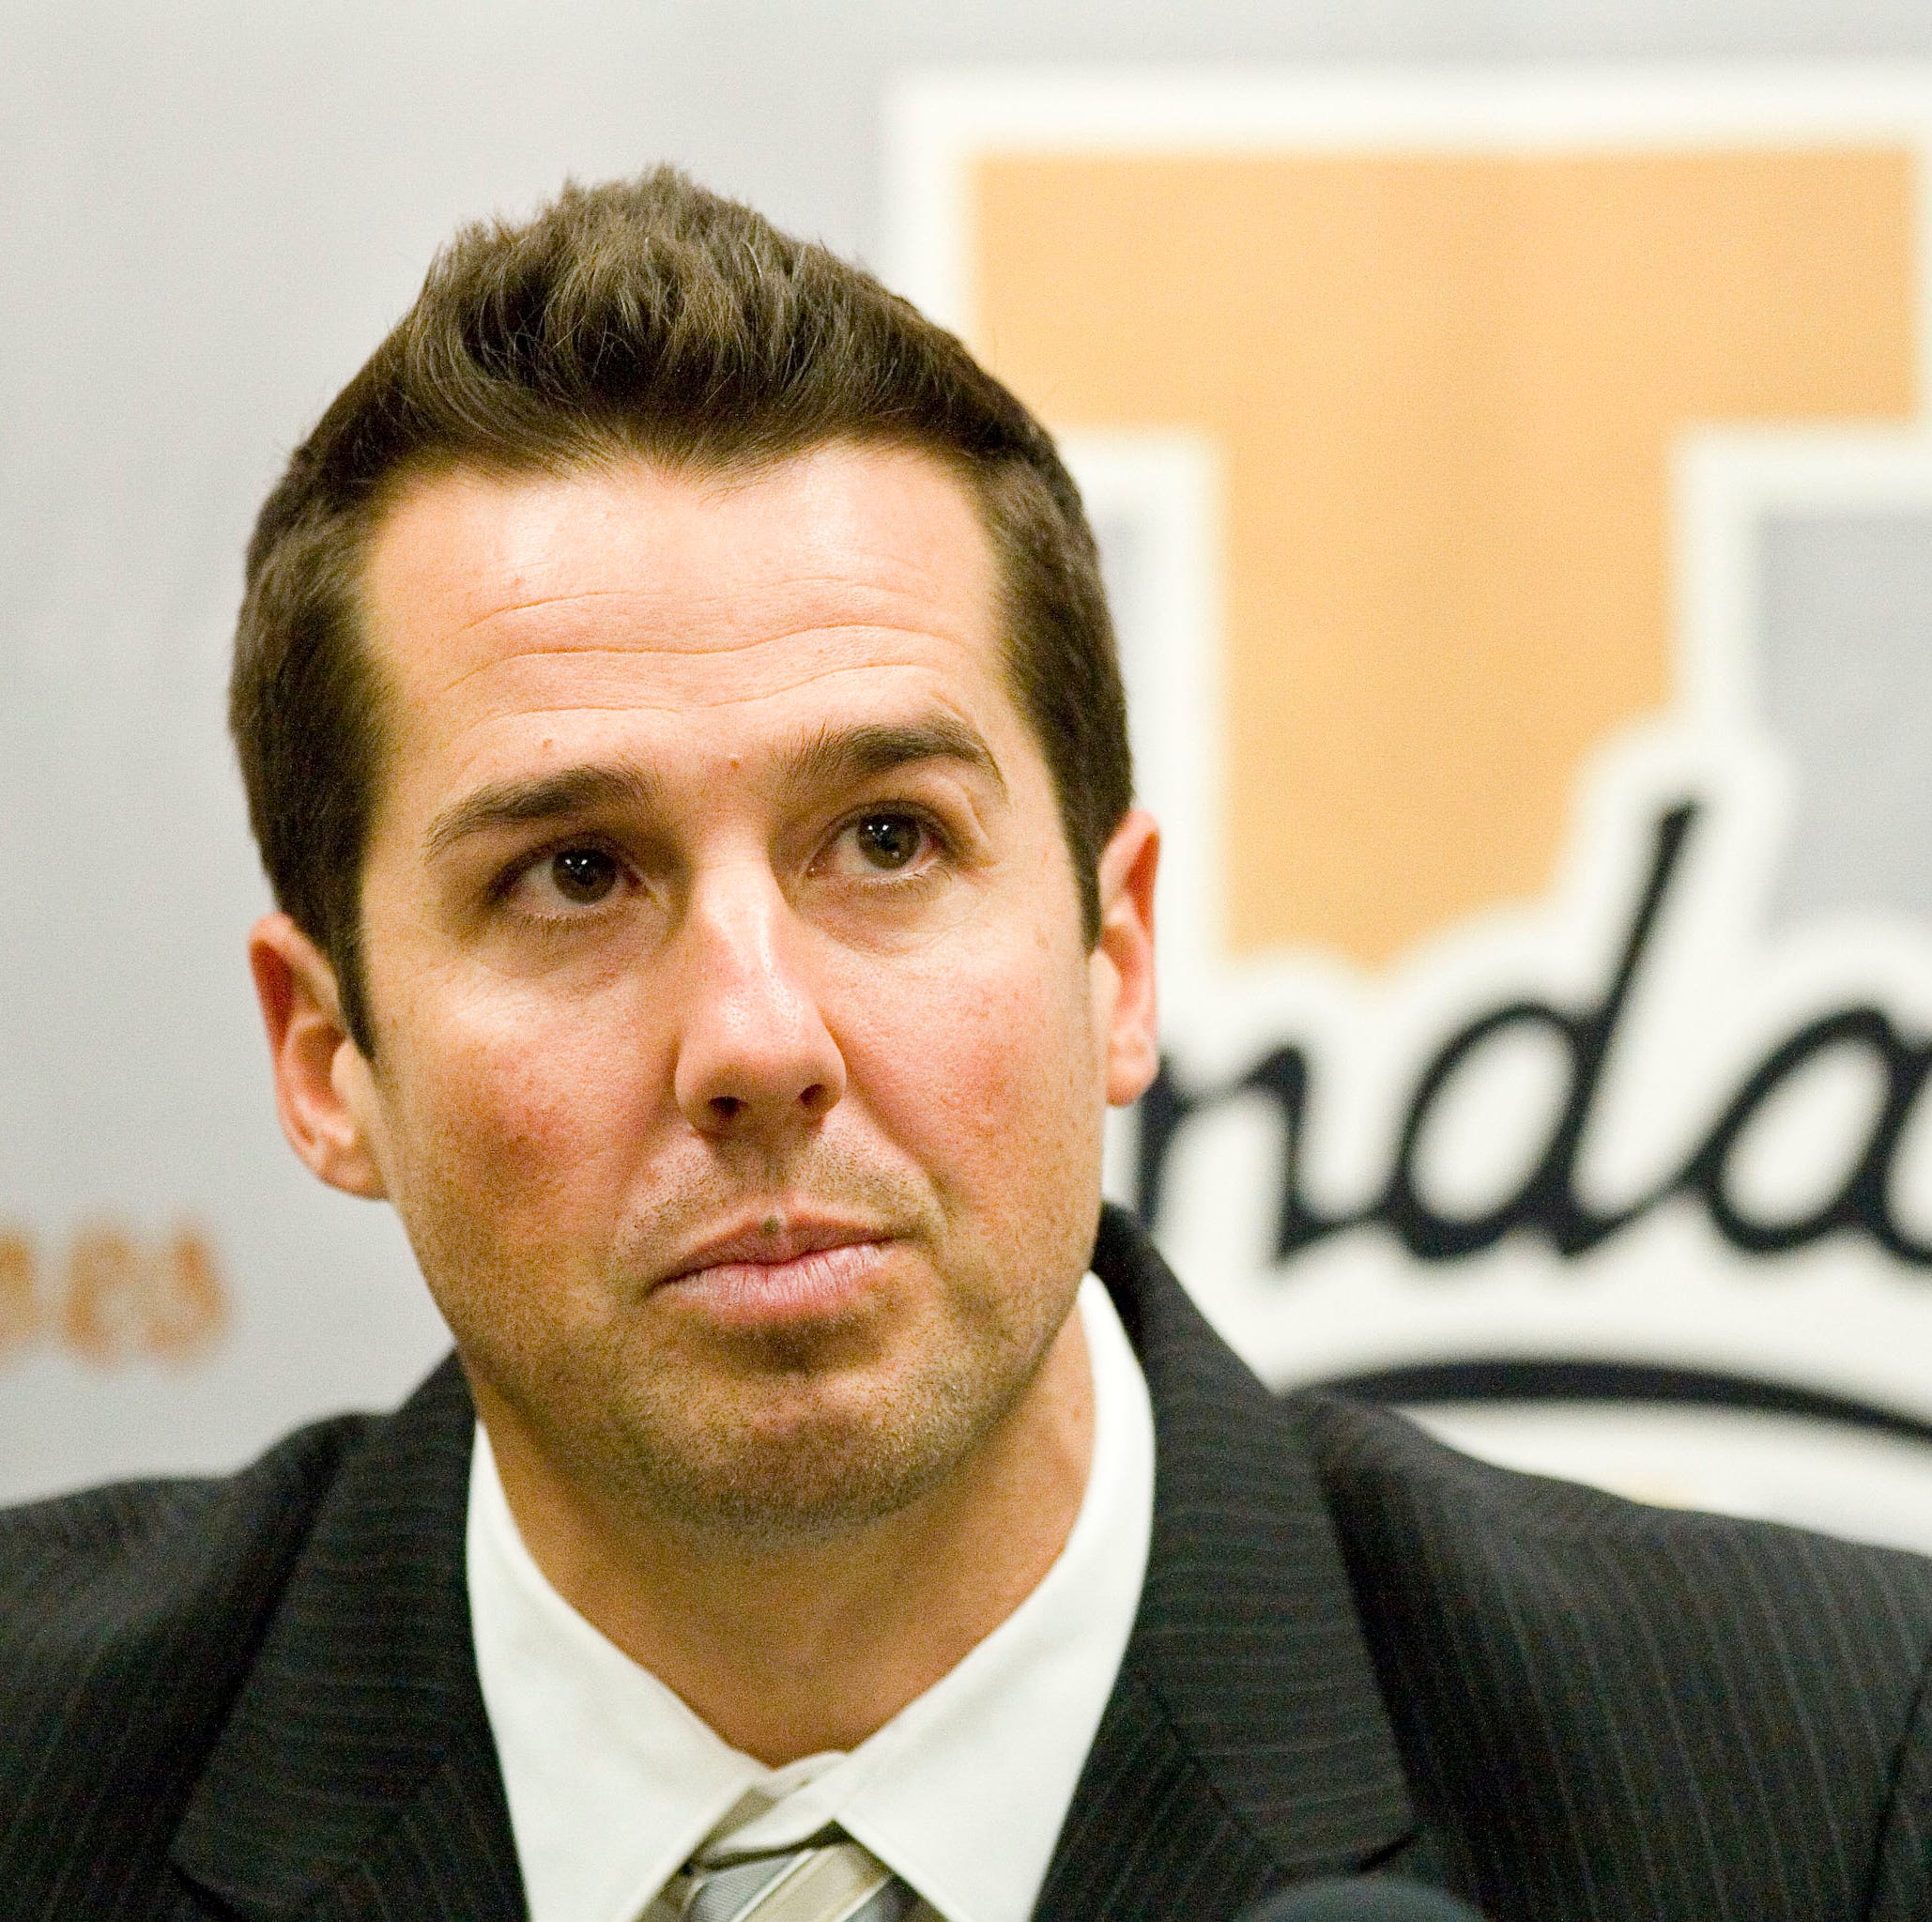 Jason Gesser, seen here during his time at Idaho, has resigned from his position in the athletics department at Washington State.